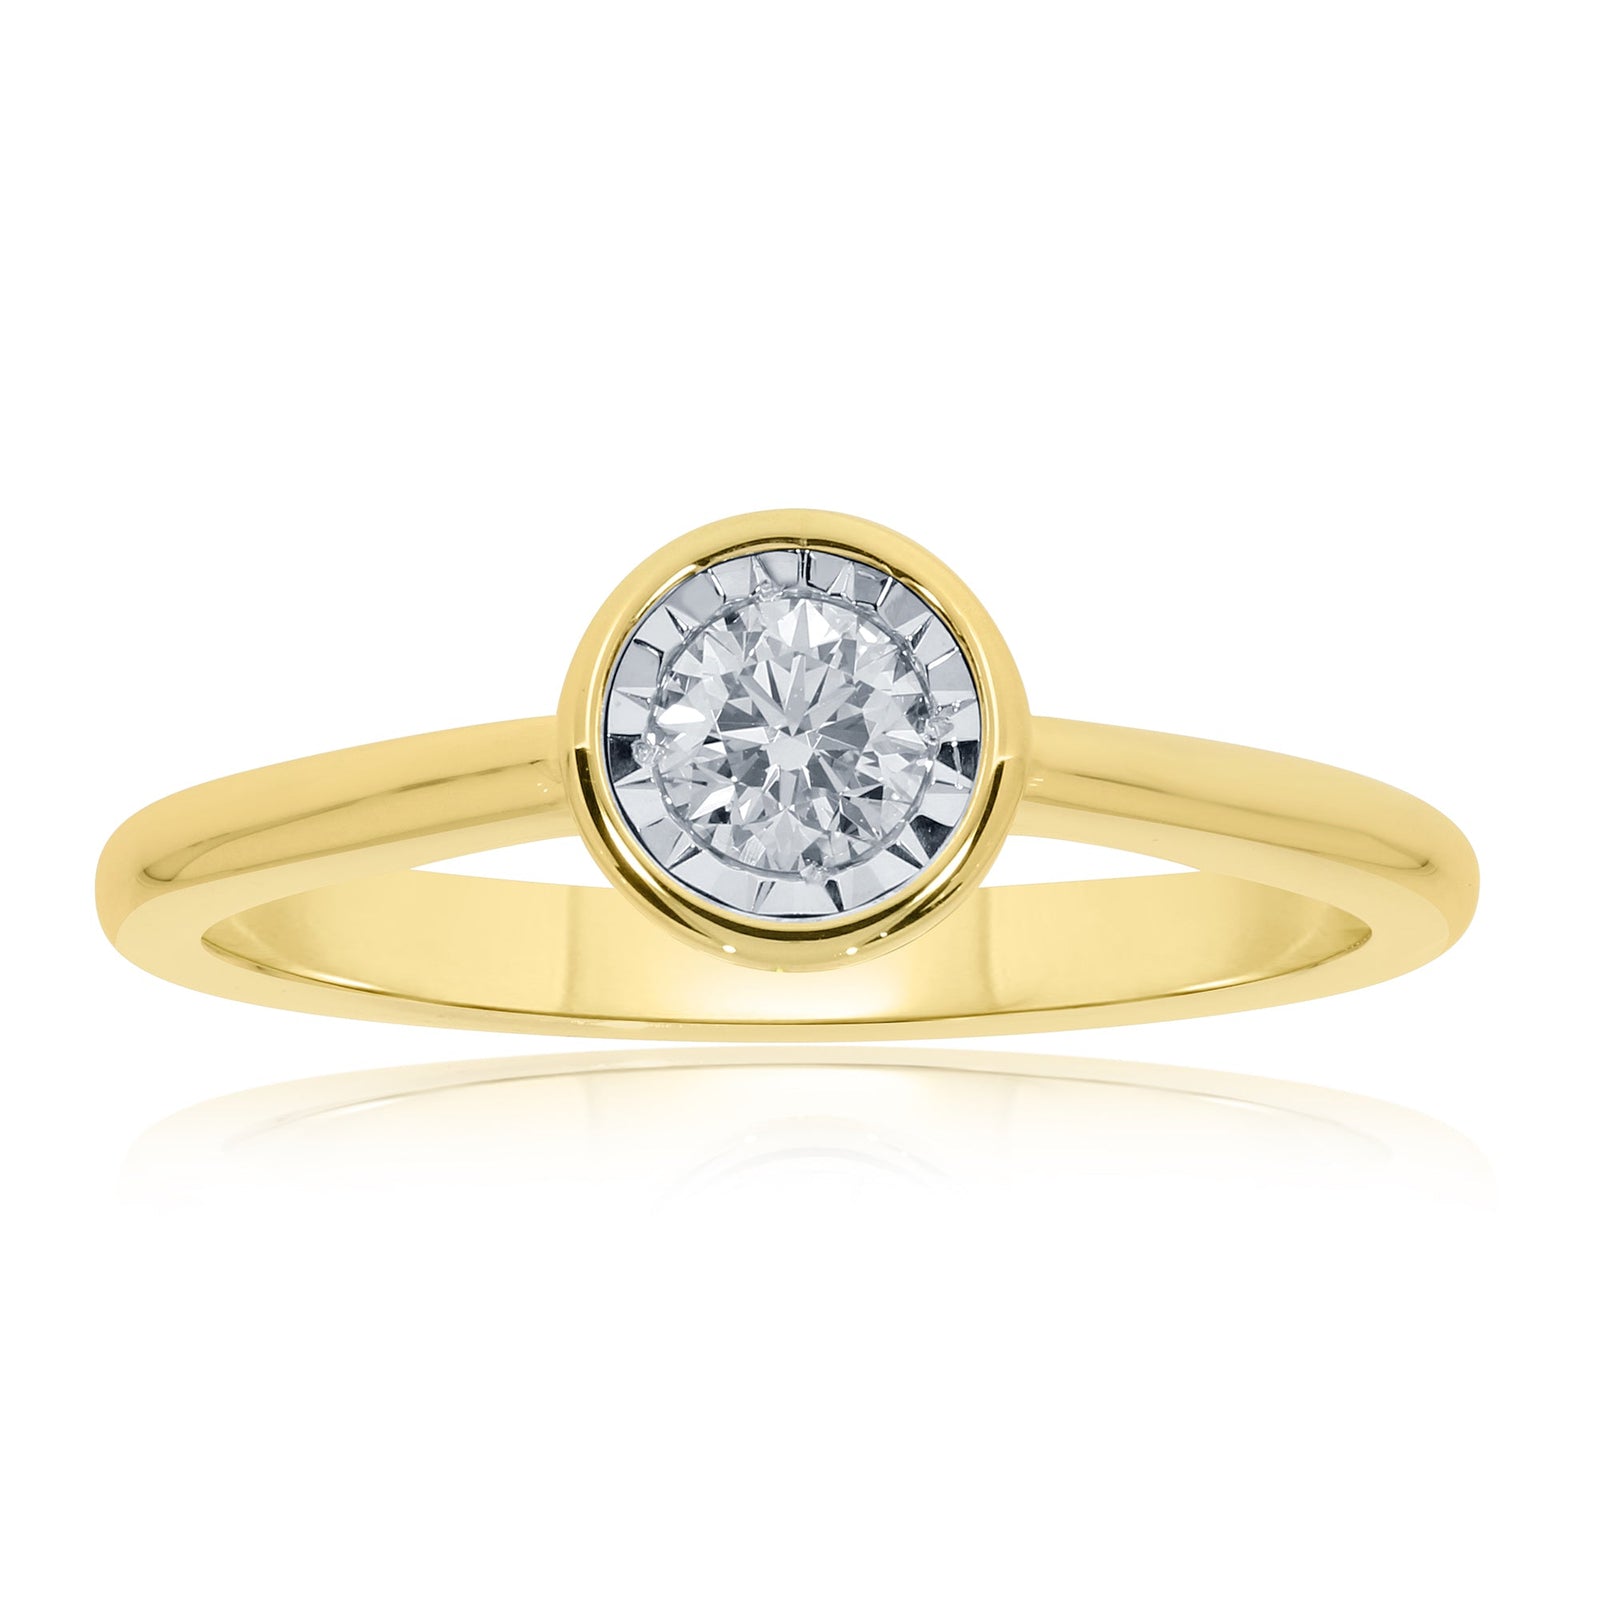 9ct gold single stone miracle plate diamond ring 0.25ct